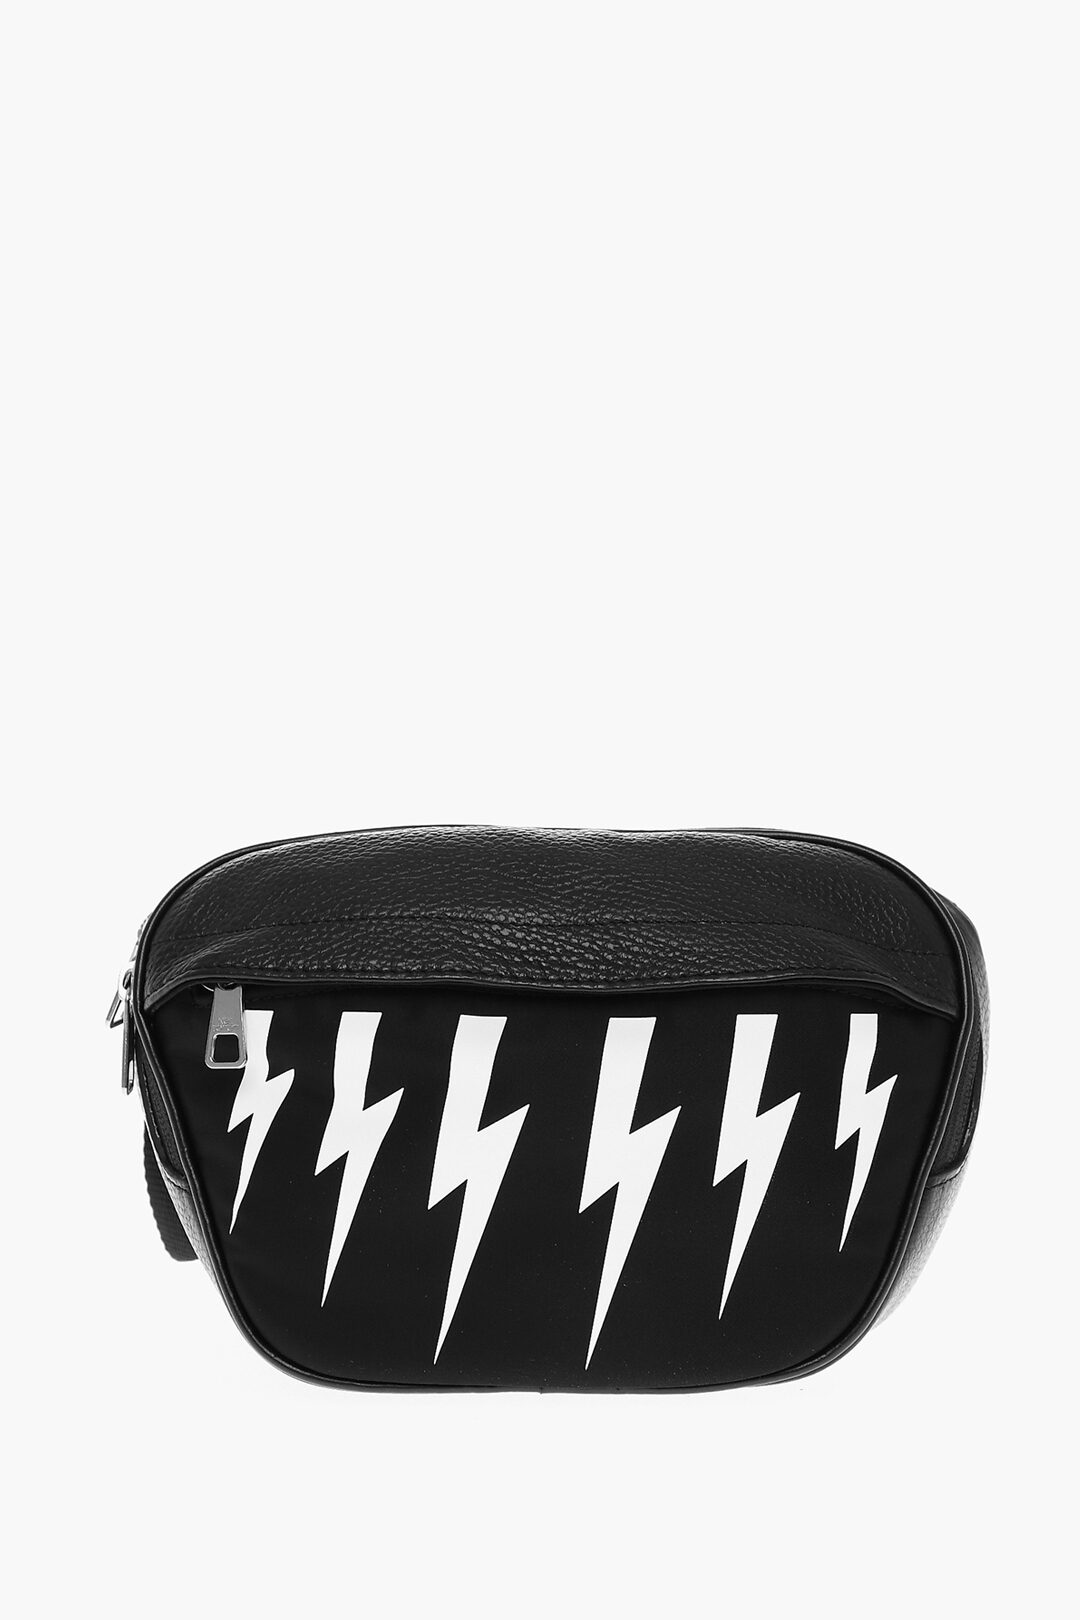 Neil Barrett Technical Fabric CITY Bum Bag with Textured Leather ...